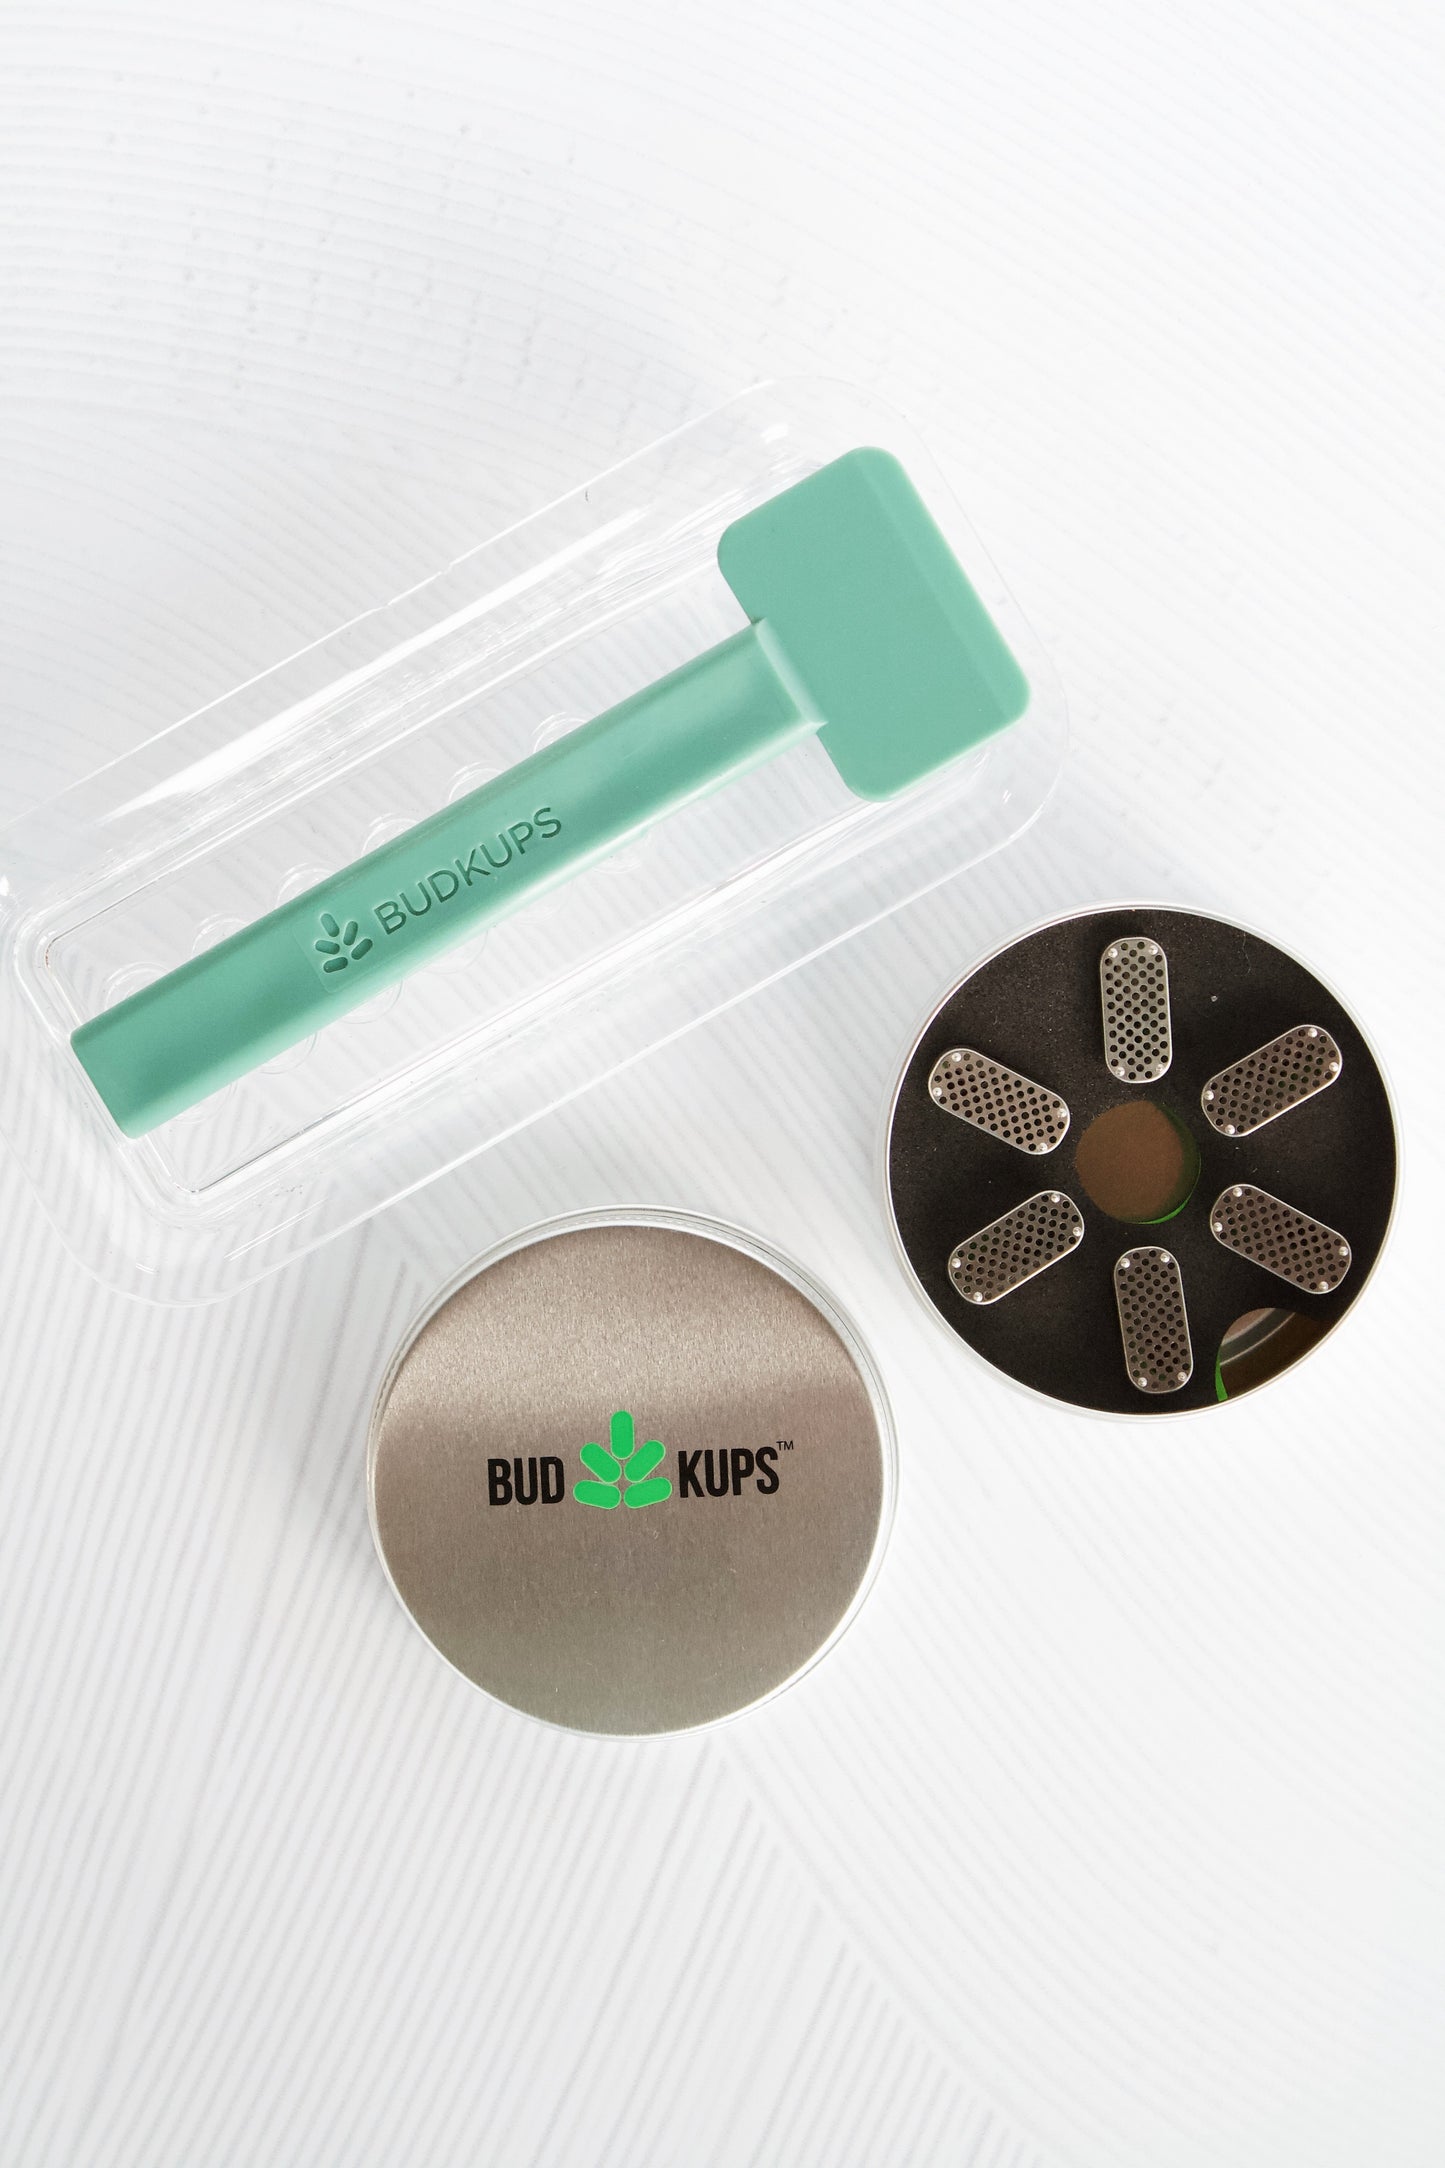 Budkit Plus (compatible with Pax 2/3) - Budkups